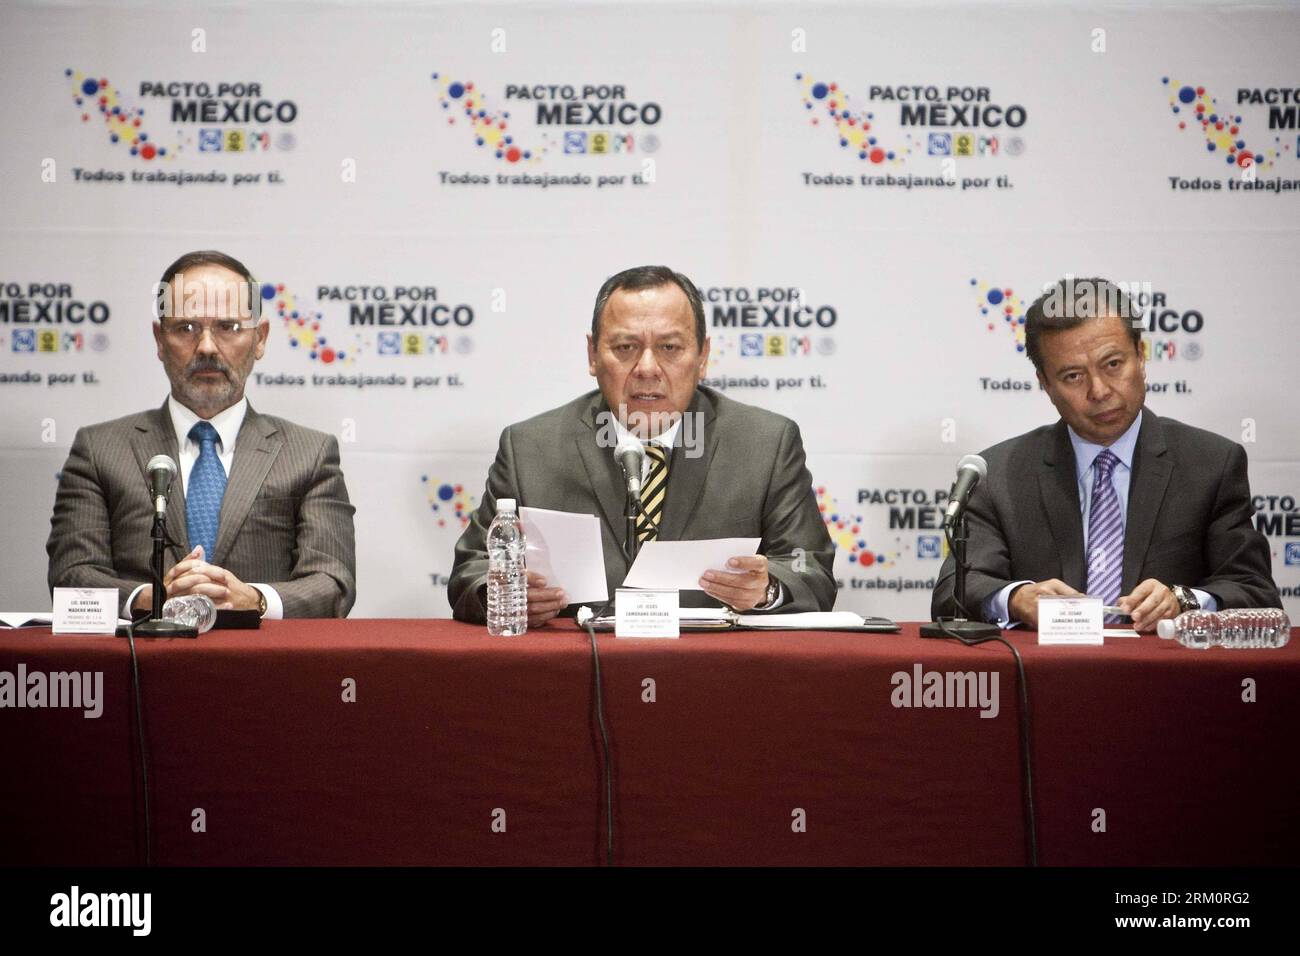 Bildnummer: 59466799  Datum: 01.04.2013  Copyright: imago/Xinhua MEXICO CITY, April 1, 2013 (Xinhua) -- The national President of National Action Party Gustavo Madero (L), the national President of Democratic Revolution Party Jesus Zambrano (C), the president of the Institutional Revolutionary Party Cesar Camacho Quiroz (R) attend a press conference in Mexico City, capital of Mexico, on April 1, 2013. (Xinhua/Rodrigo Oropeza) (ro) (rh) (py) MEXICO-MEXICO CITY-POLITICS-CONFERENCE PUBLICATIONxNOTxINxCHN People xcb x0x 2013 quer premiumd     59466799 Date 01 04 2013 Copyright Imago XINHUA Mexico Stock Photo